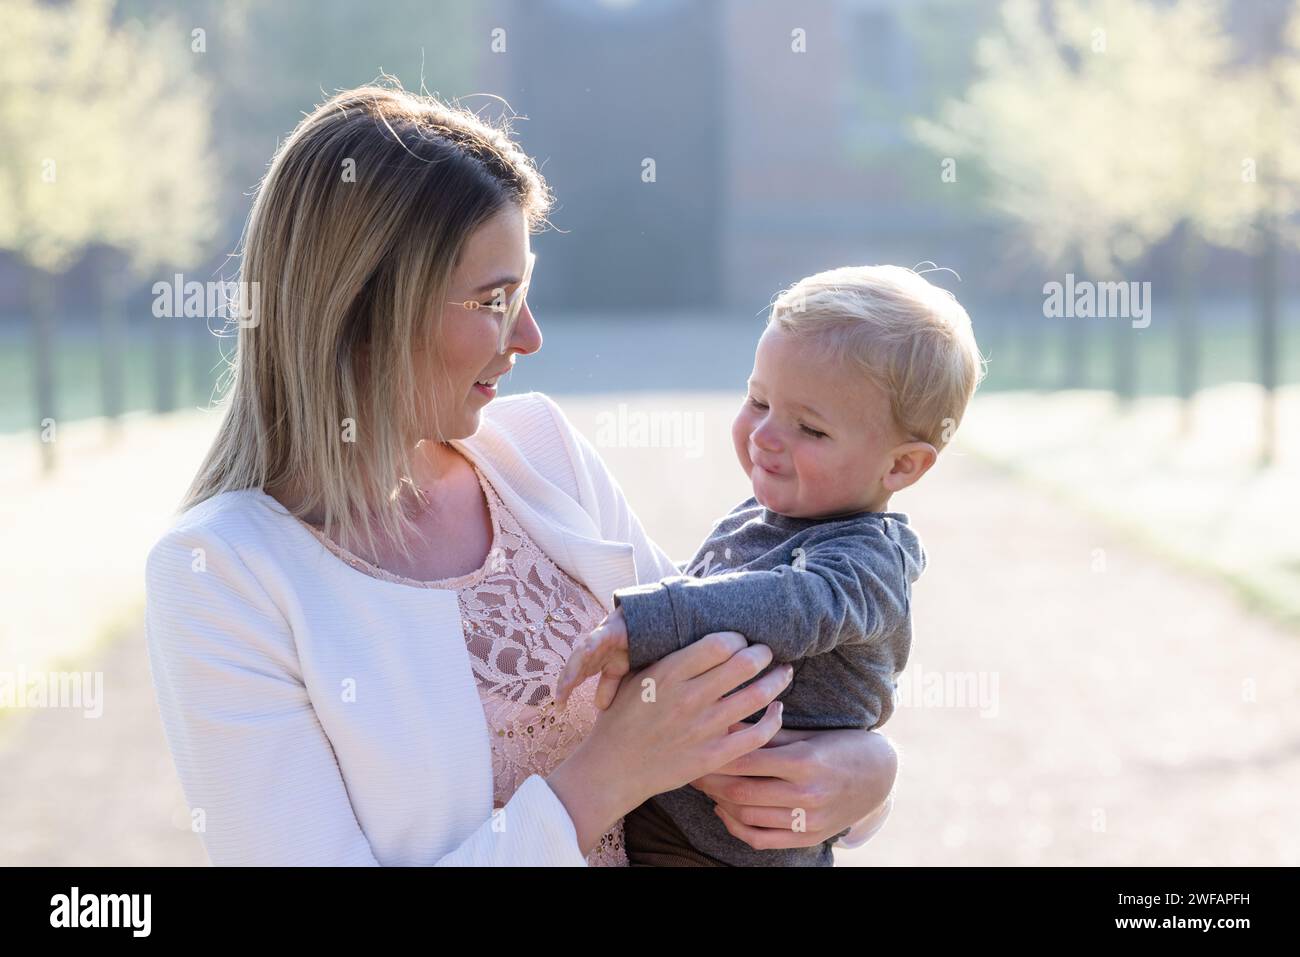 The image radiates with the warmth of a maternal bond as a young Caucasian woman holds a toddler, their gazes locked in a loving exchange. The softness in the child's eyes and the gentle smile on the woman's lips speak volumes about their special connection. The gentle morning light washes over them, enhancing the tenderness of the moment, set against the tranquil backdrop of a sunlit park. Intimate Moments of Maternal Bliss. High quality photo Stock Photo